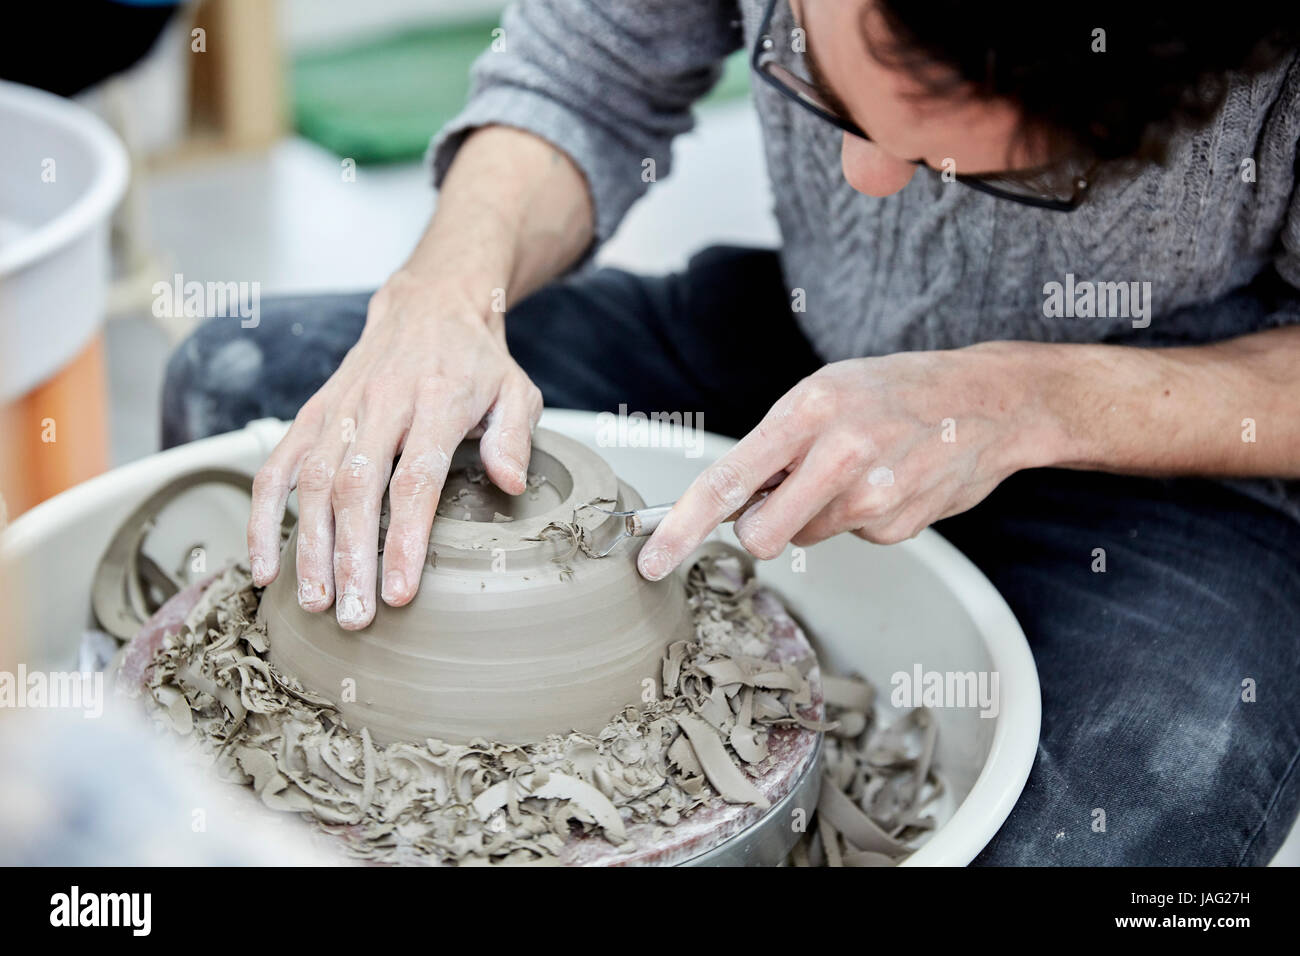 A man seated at a potter's wheel working and shaping a clay pot by removing excess clay. Stock Photo